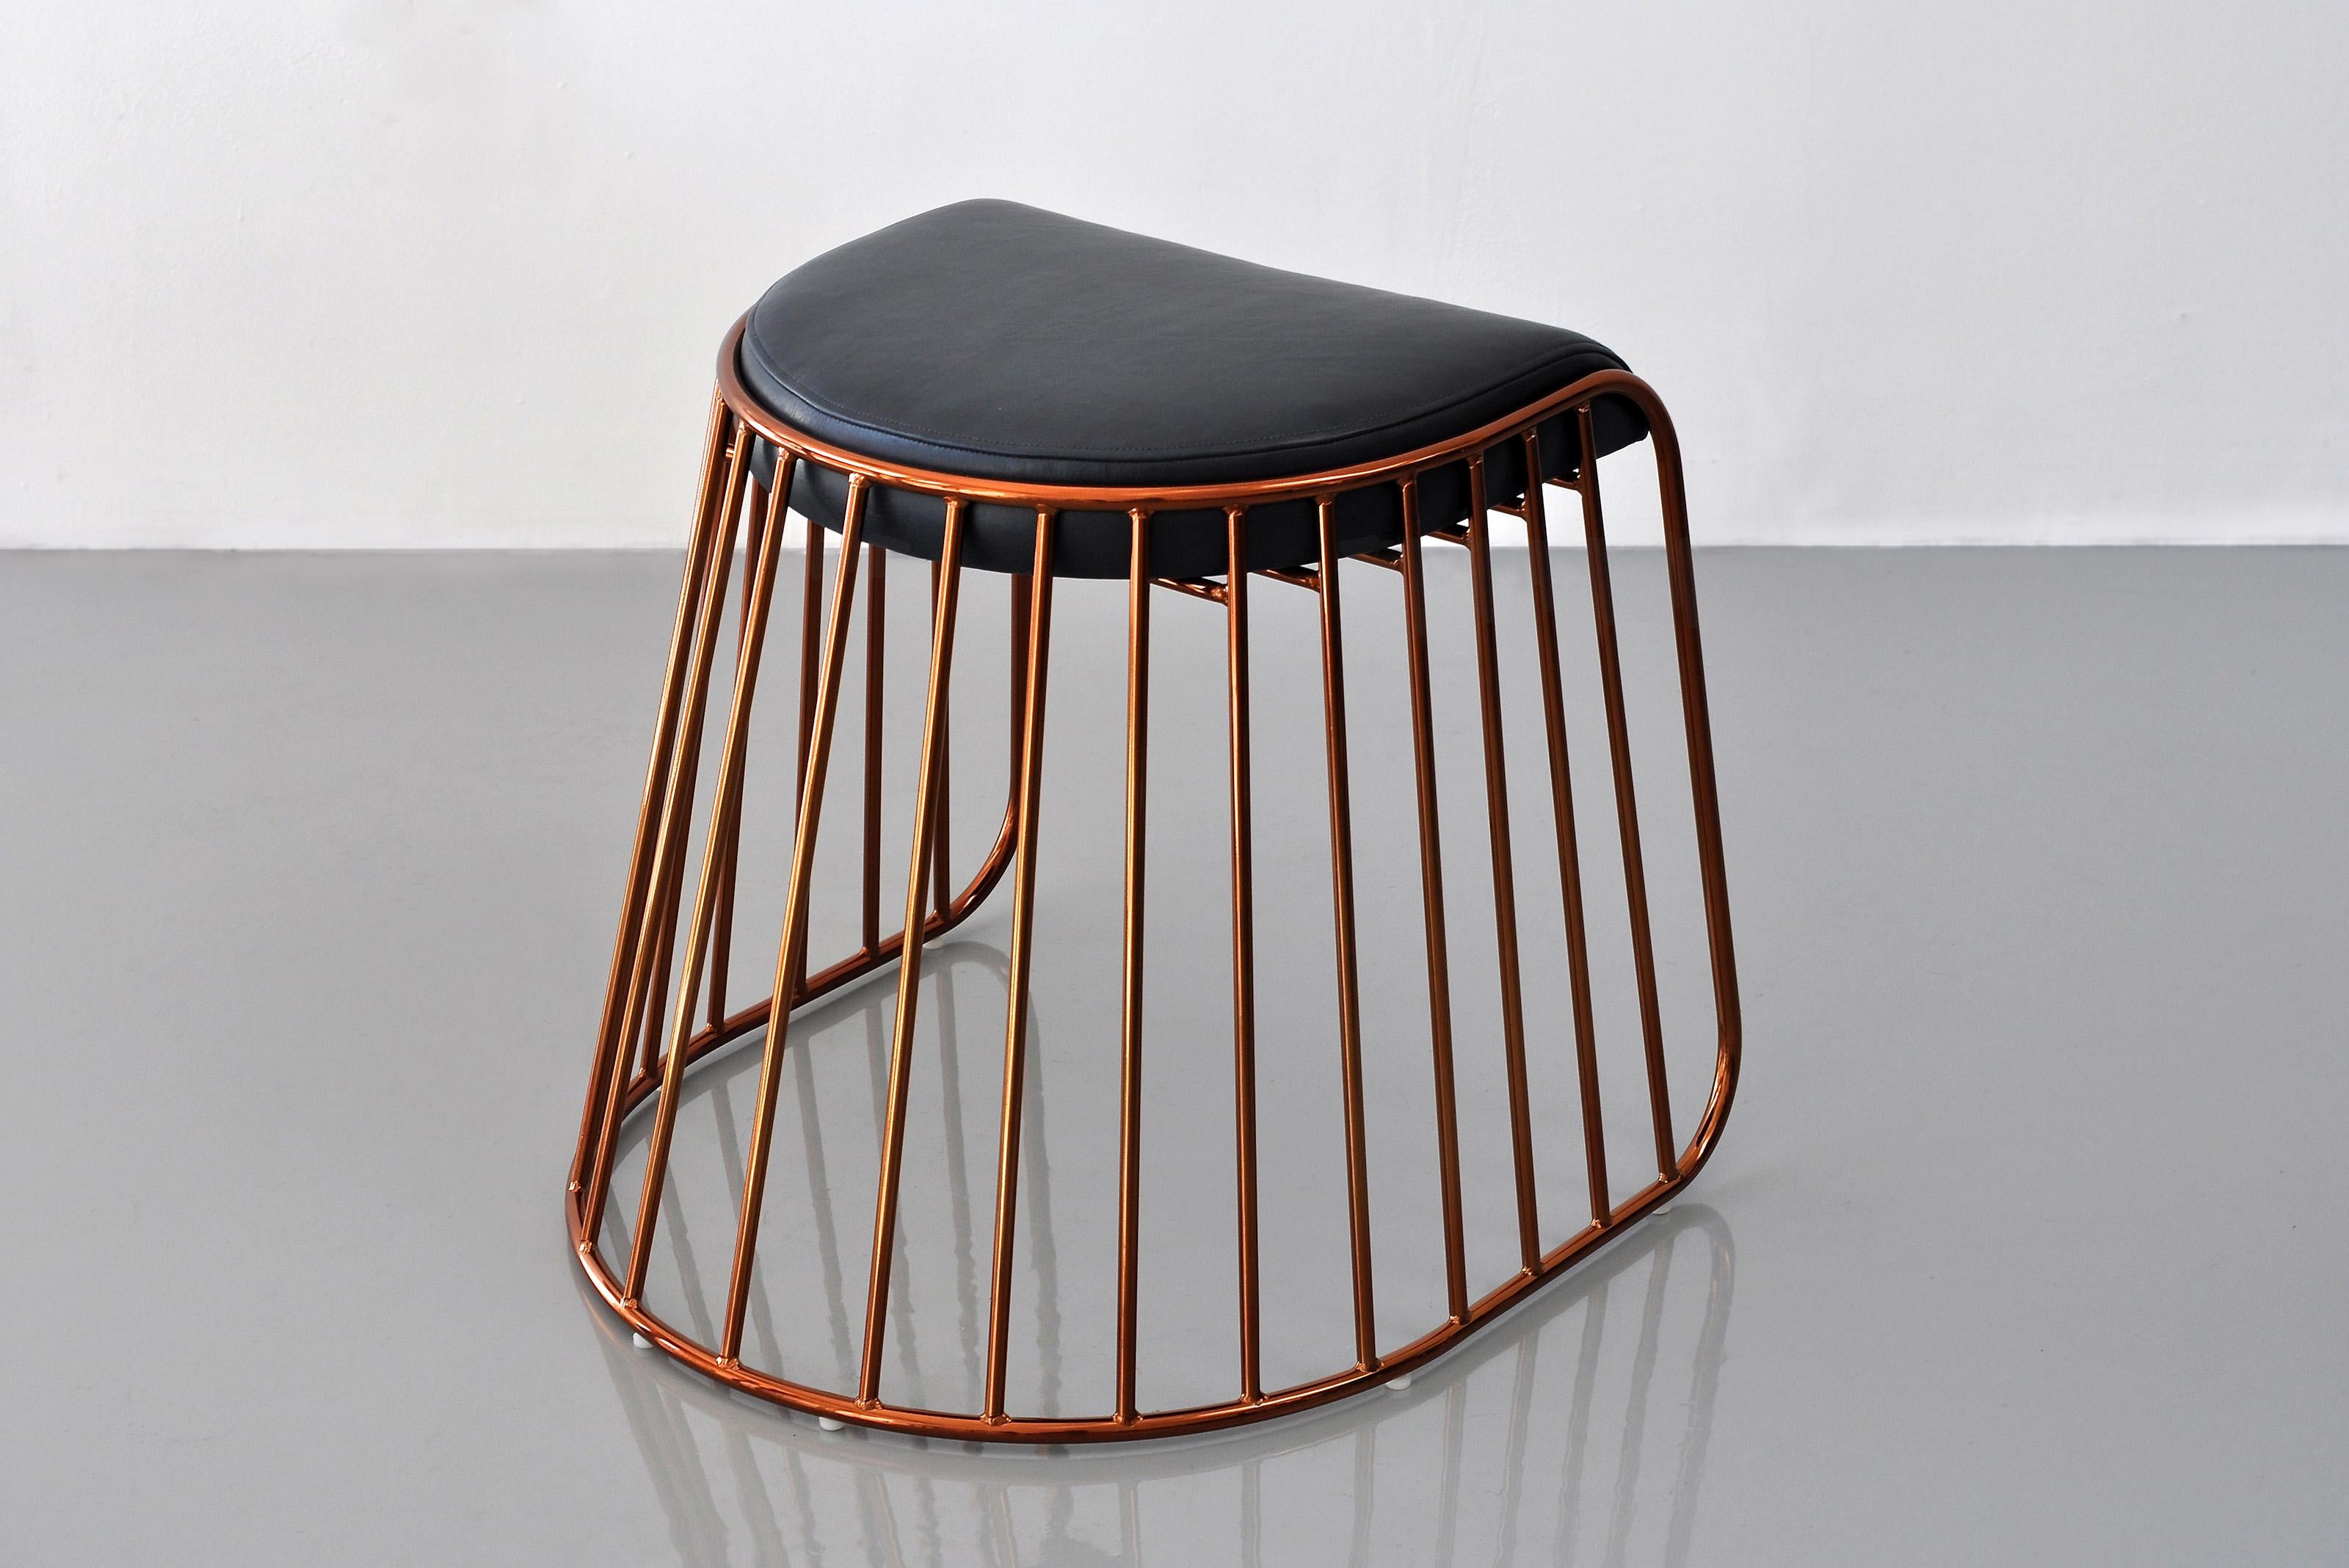 Bride’s Veil Low Stool by Phase Design
Dimensions: D 52,1 x W 53,3 x H 45,7 cm.
Materials: Upholstery, steel and burnt copper.

Solid steel bar available in a smoked brass, polished chrome, burnt copper, or powder coat finish with upholstered top.